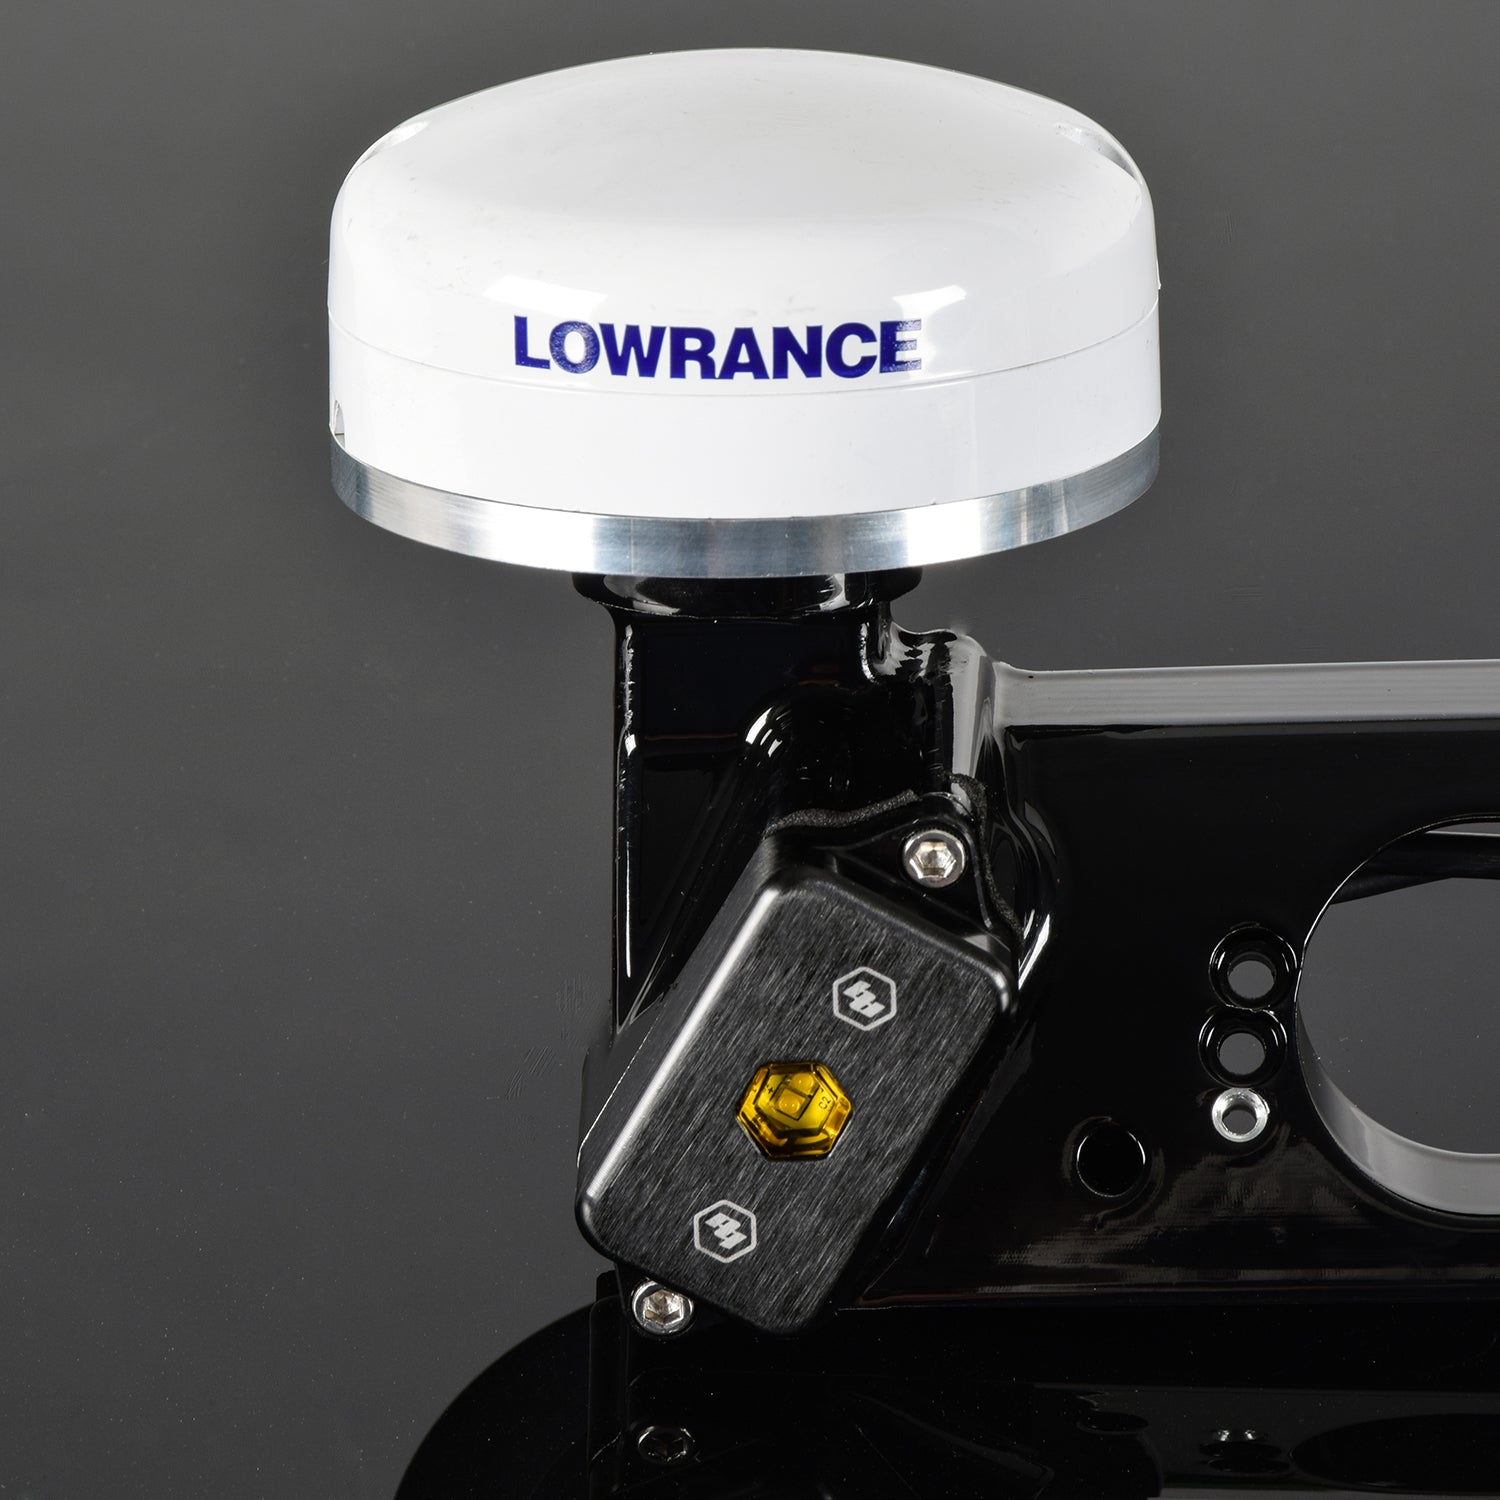 Third Brake Light Dual Antenna Mount - With LED Lights and Lowrance Po